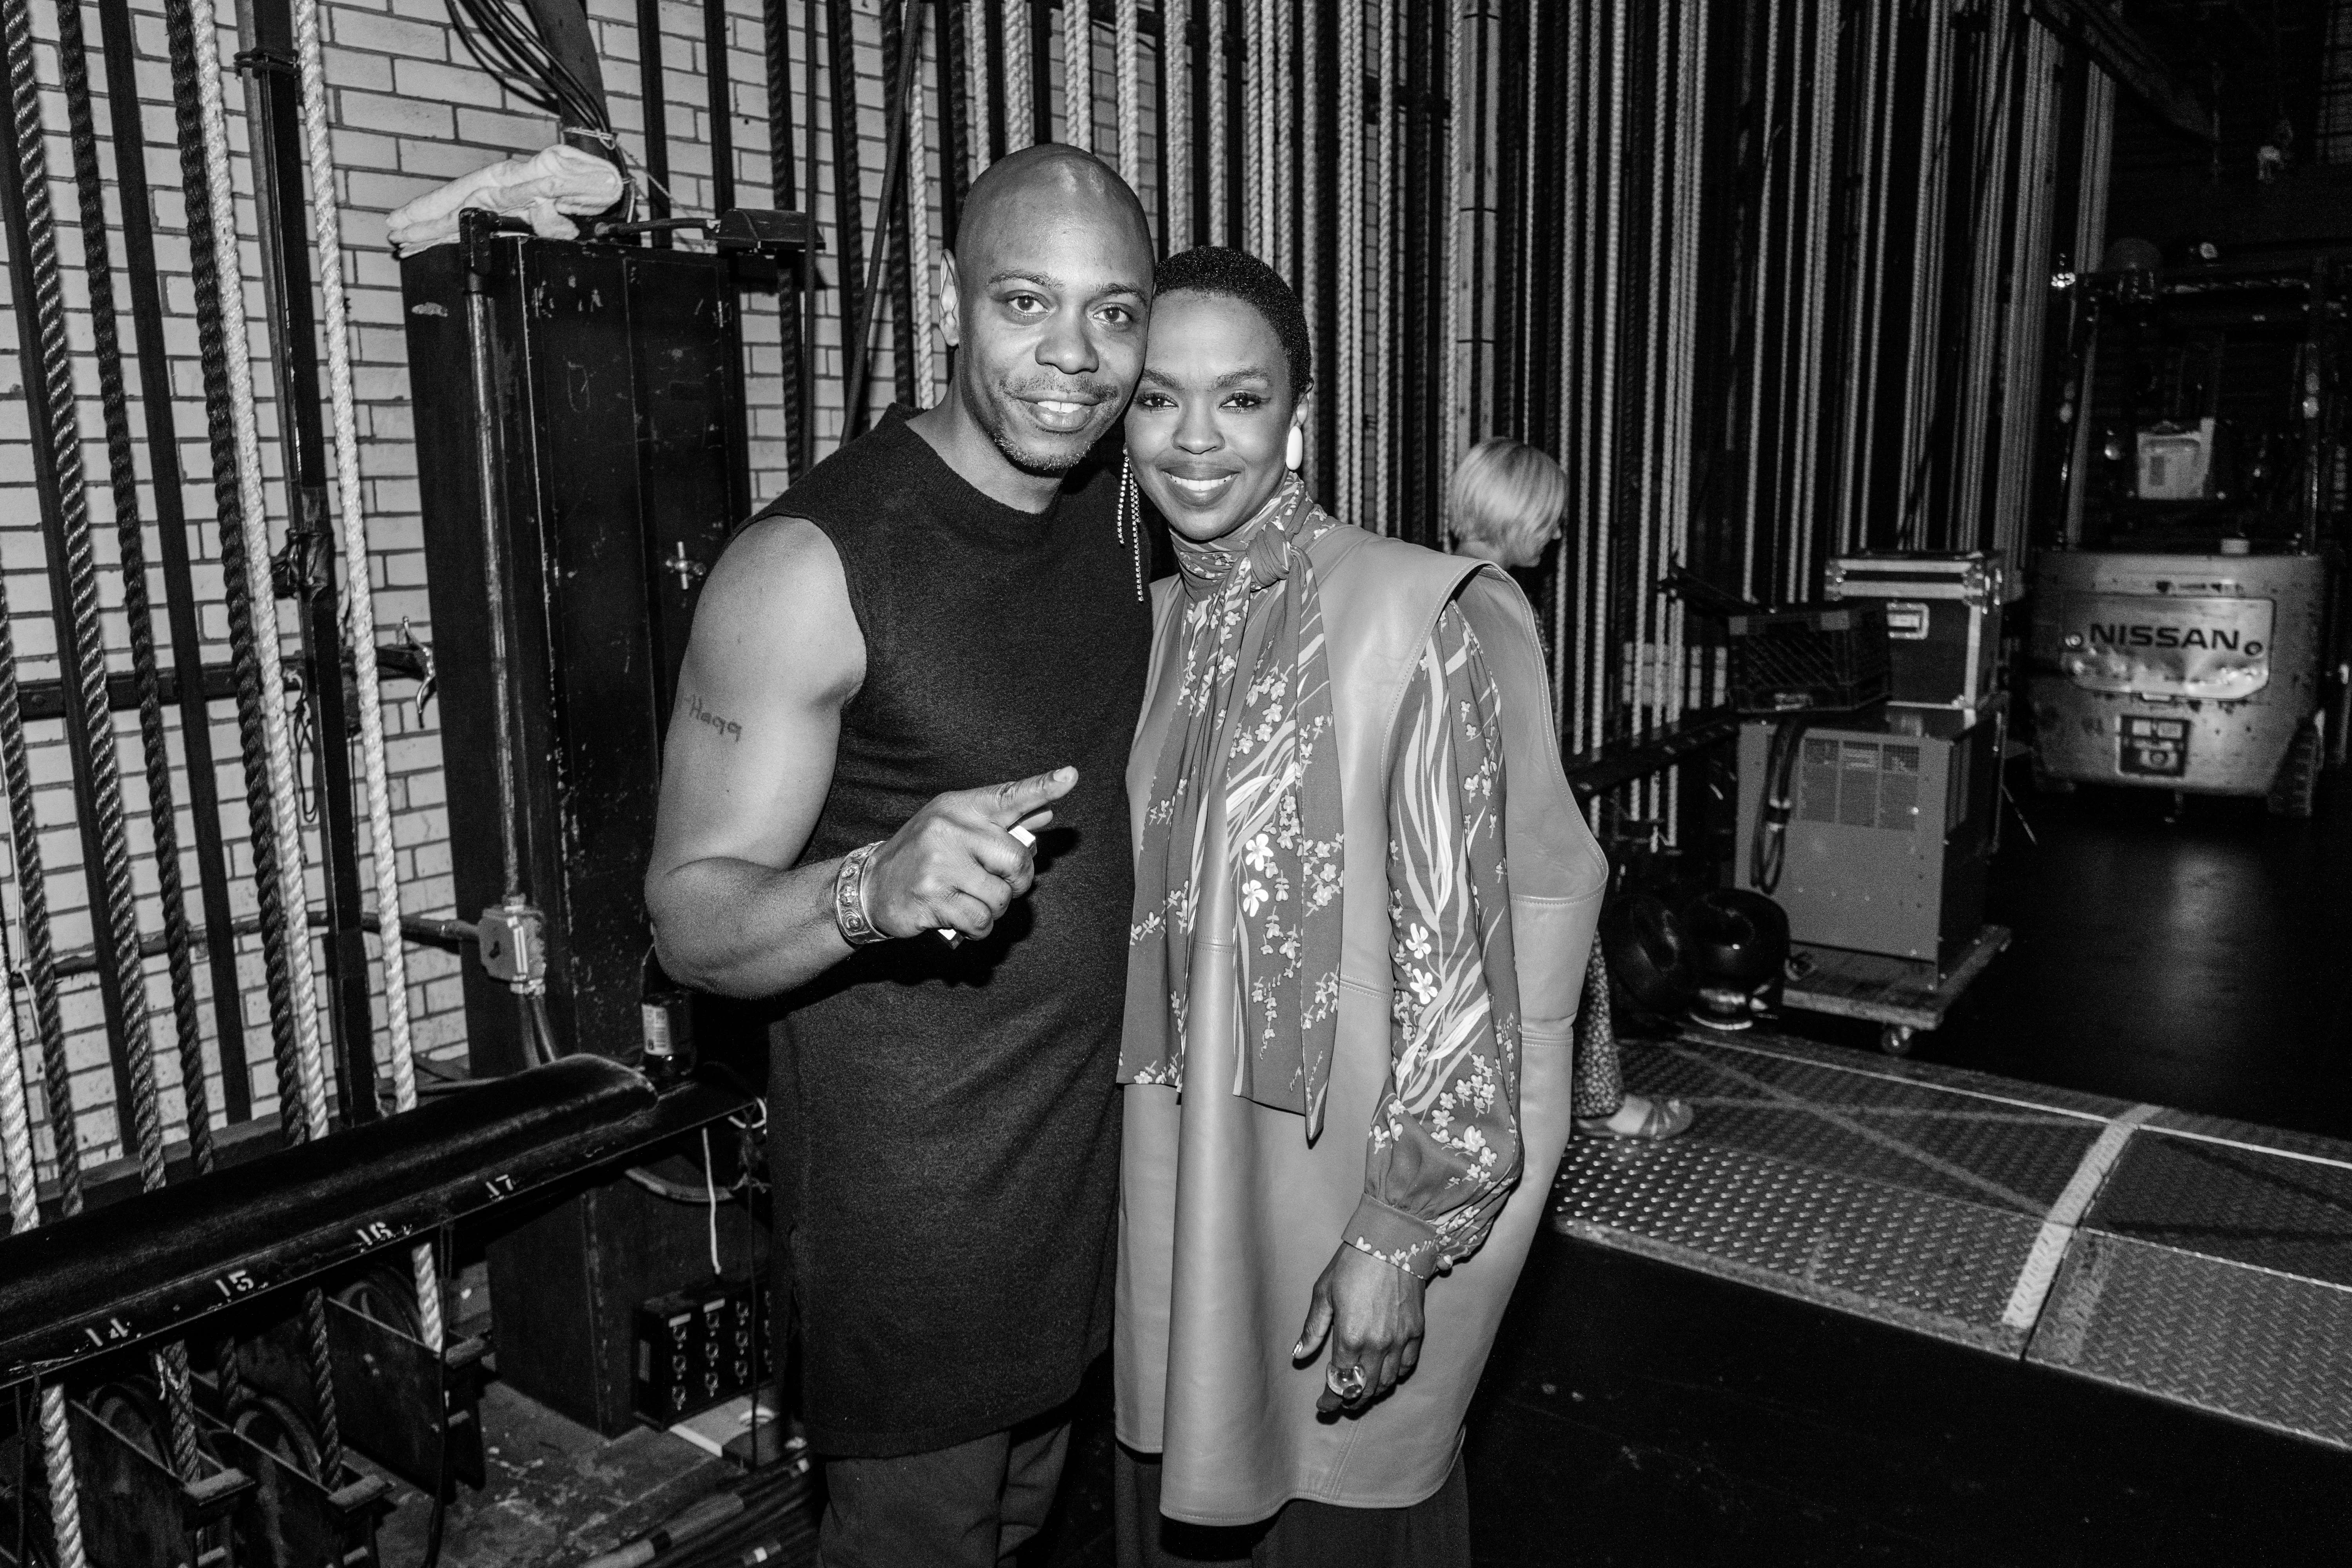 Dave Chappelle and Lauryn Hill backstage at Radio City Music Hall